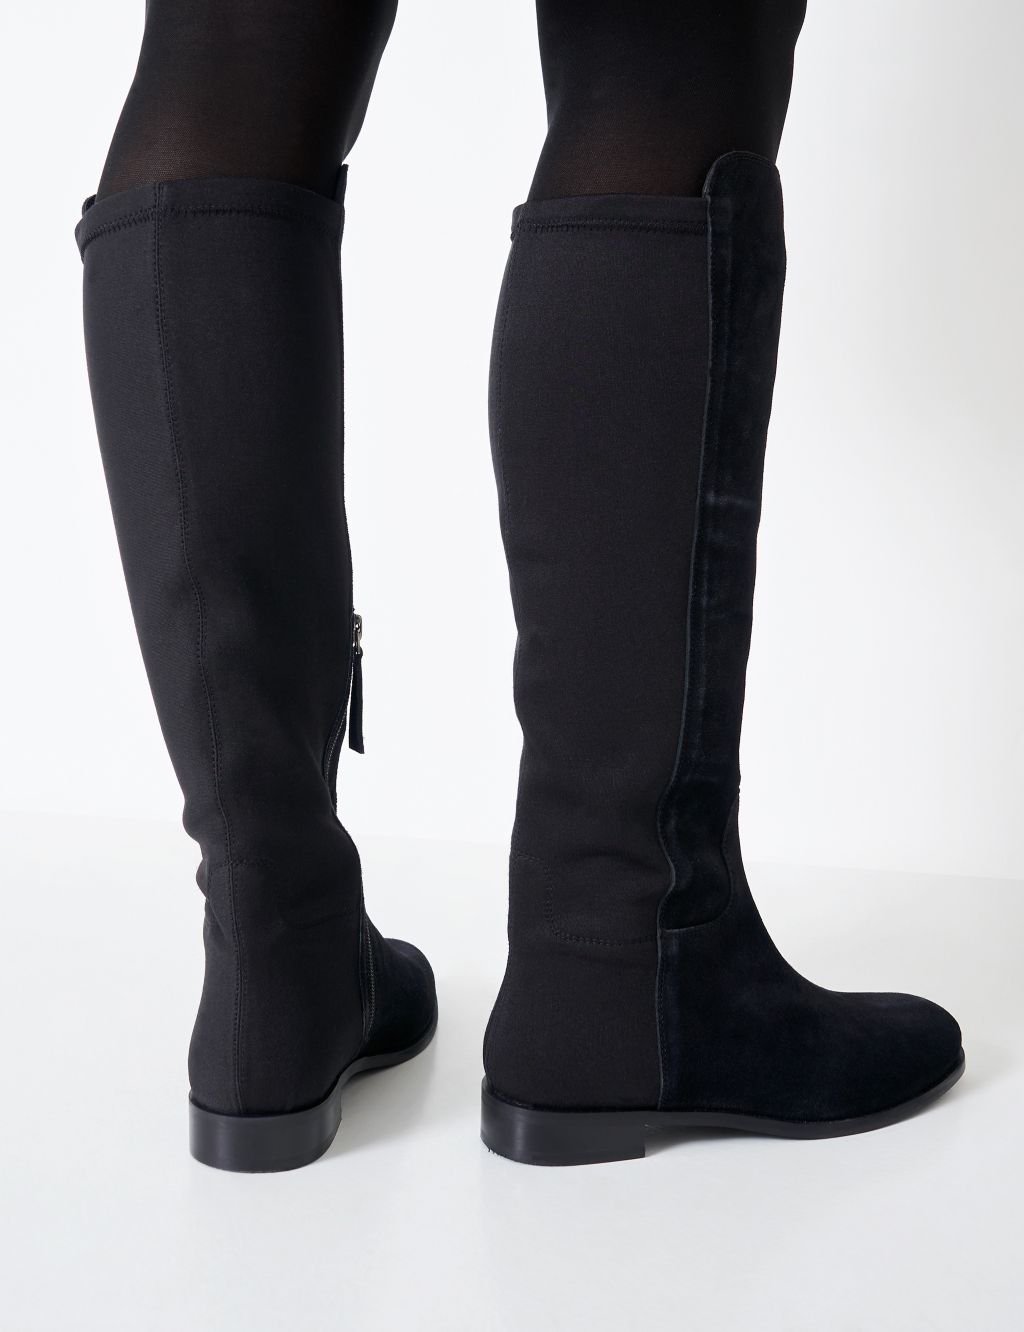 Suede Flat Knee High Boots image 4